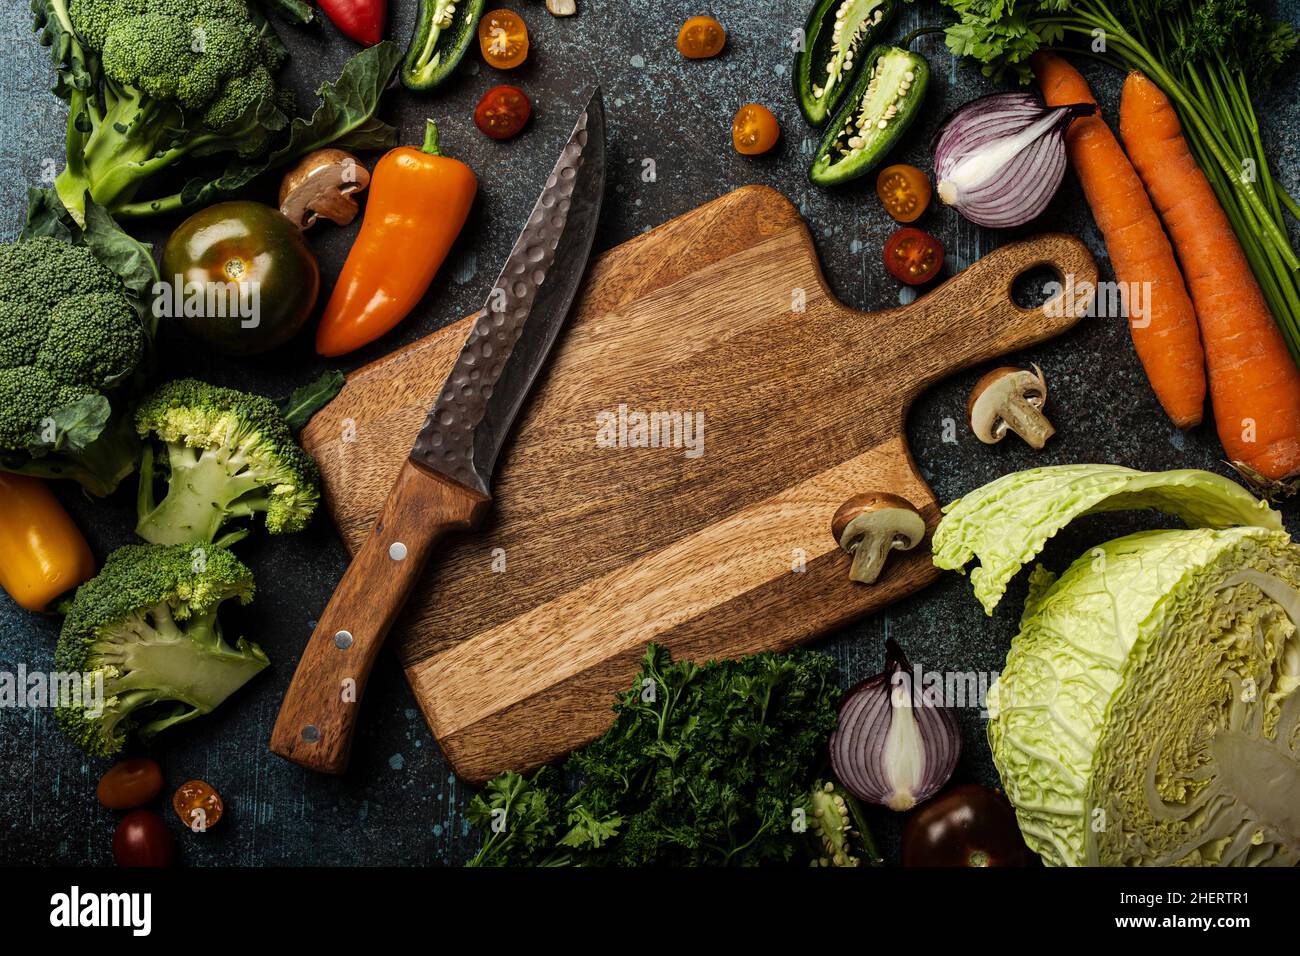 Assorted fresh vegetables on rustic concrete table with wooden cutting board in center and kitchen knife Stock Photo